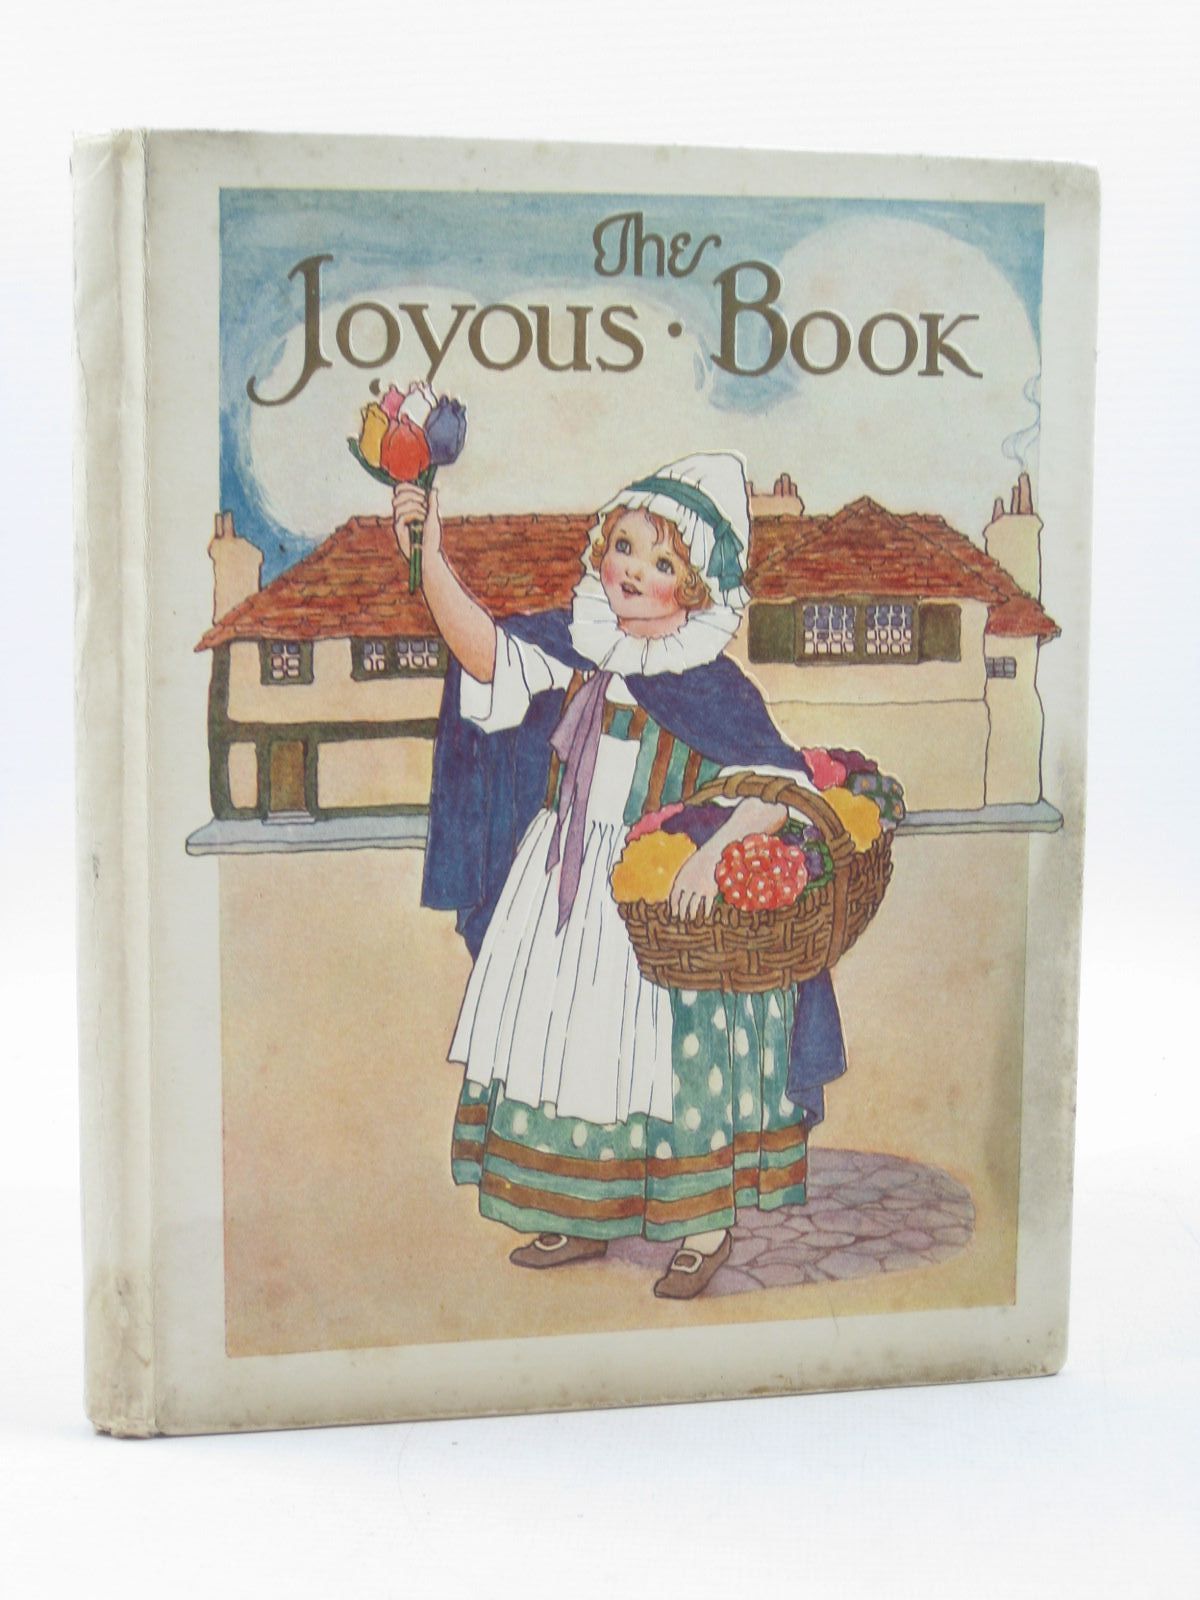 Cover of THE JOYOUS BOOK by Natalie Joan